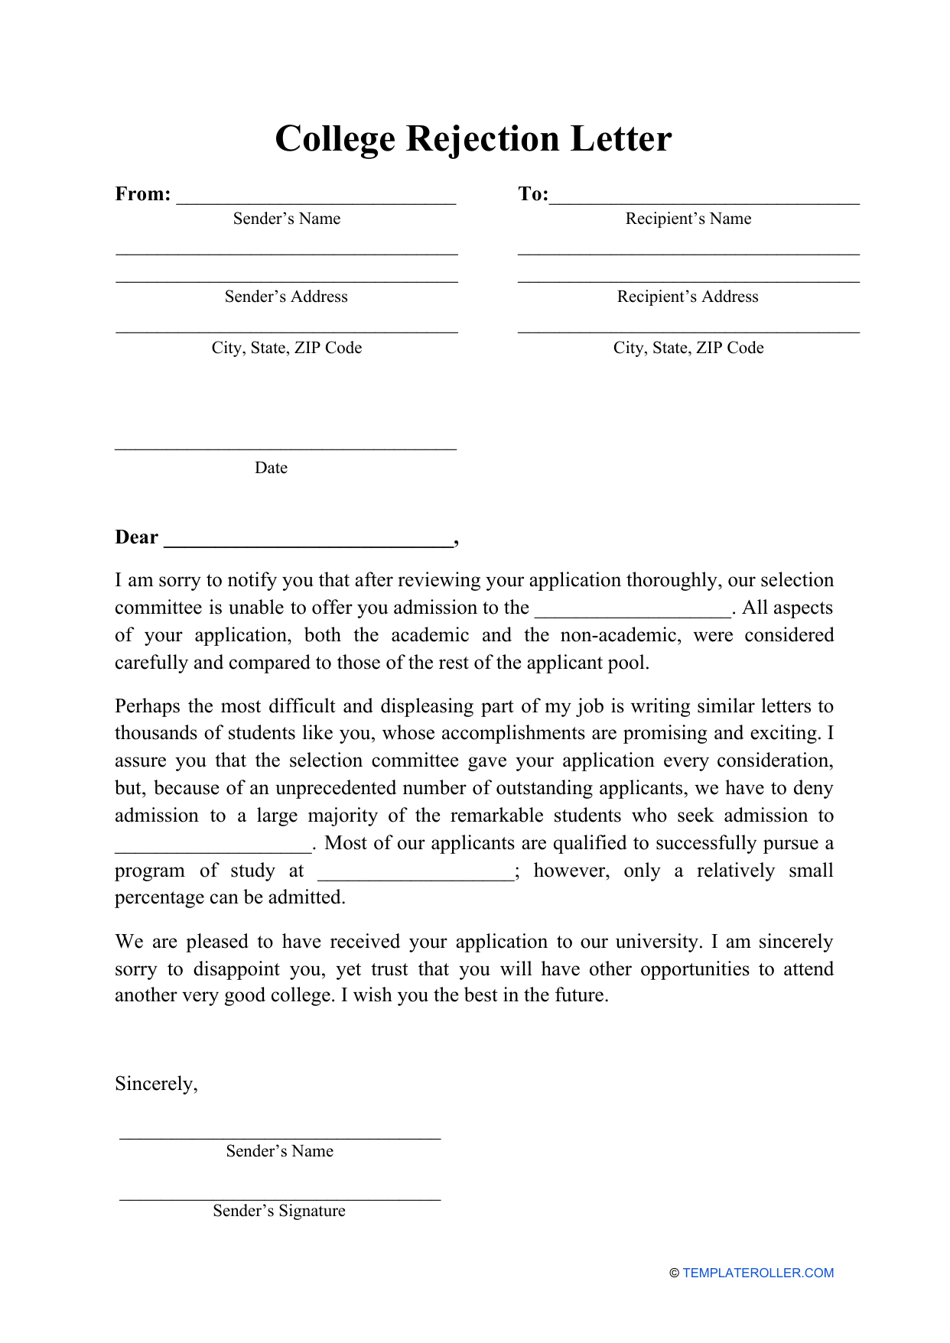 College Rejection Letter Template, Page 1